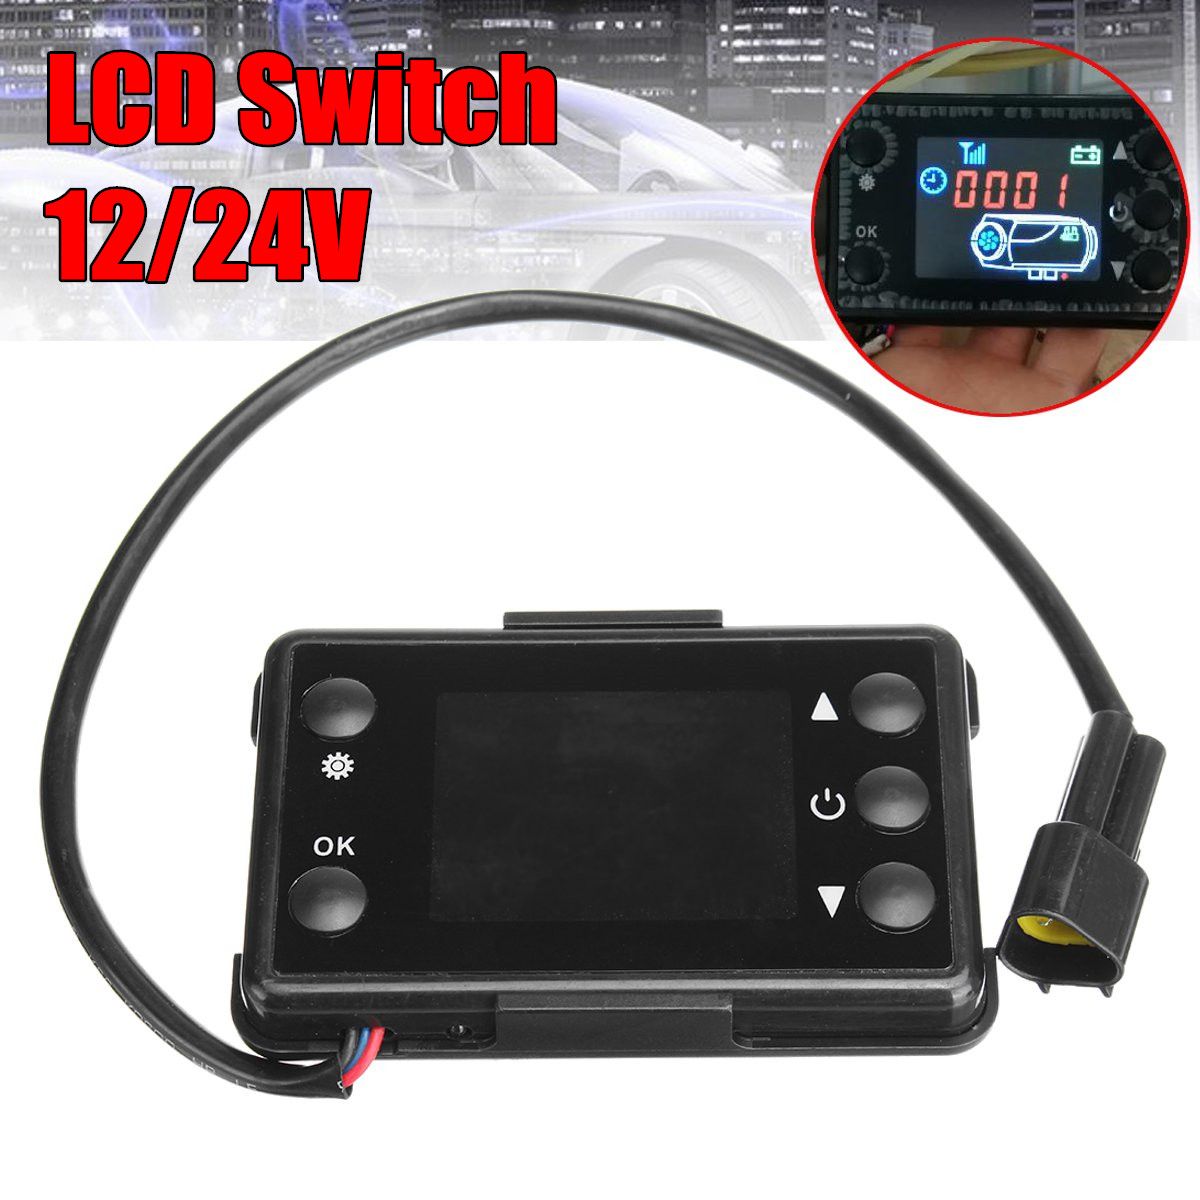 LCD-Car-Switch-1224V-5KW-Parking-Heater-Controller-for-Car-Track-Air-Diesel-Heater-1315274